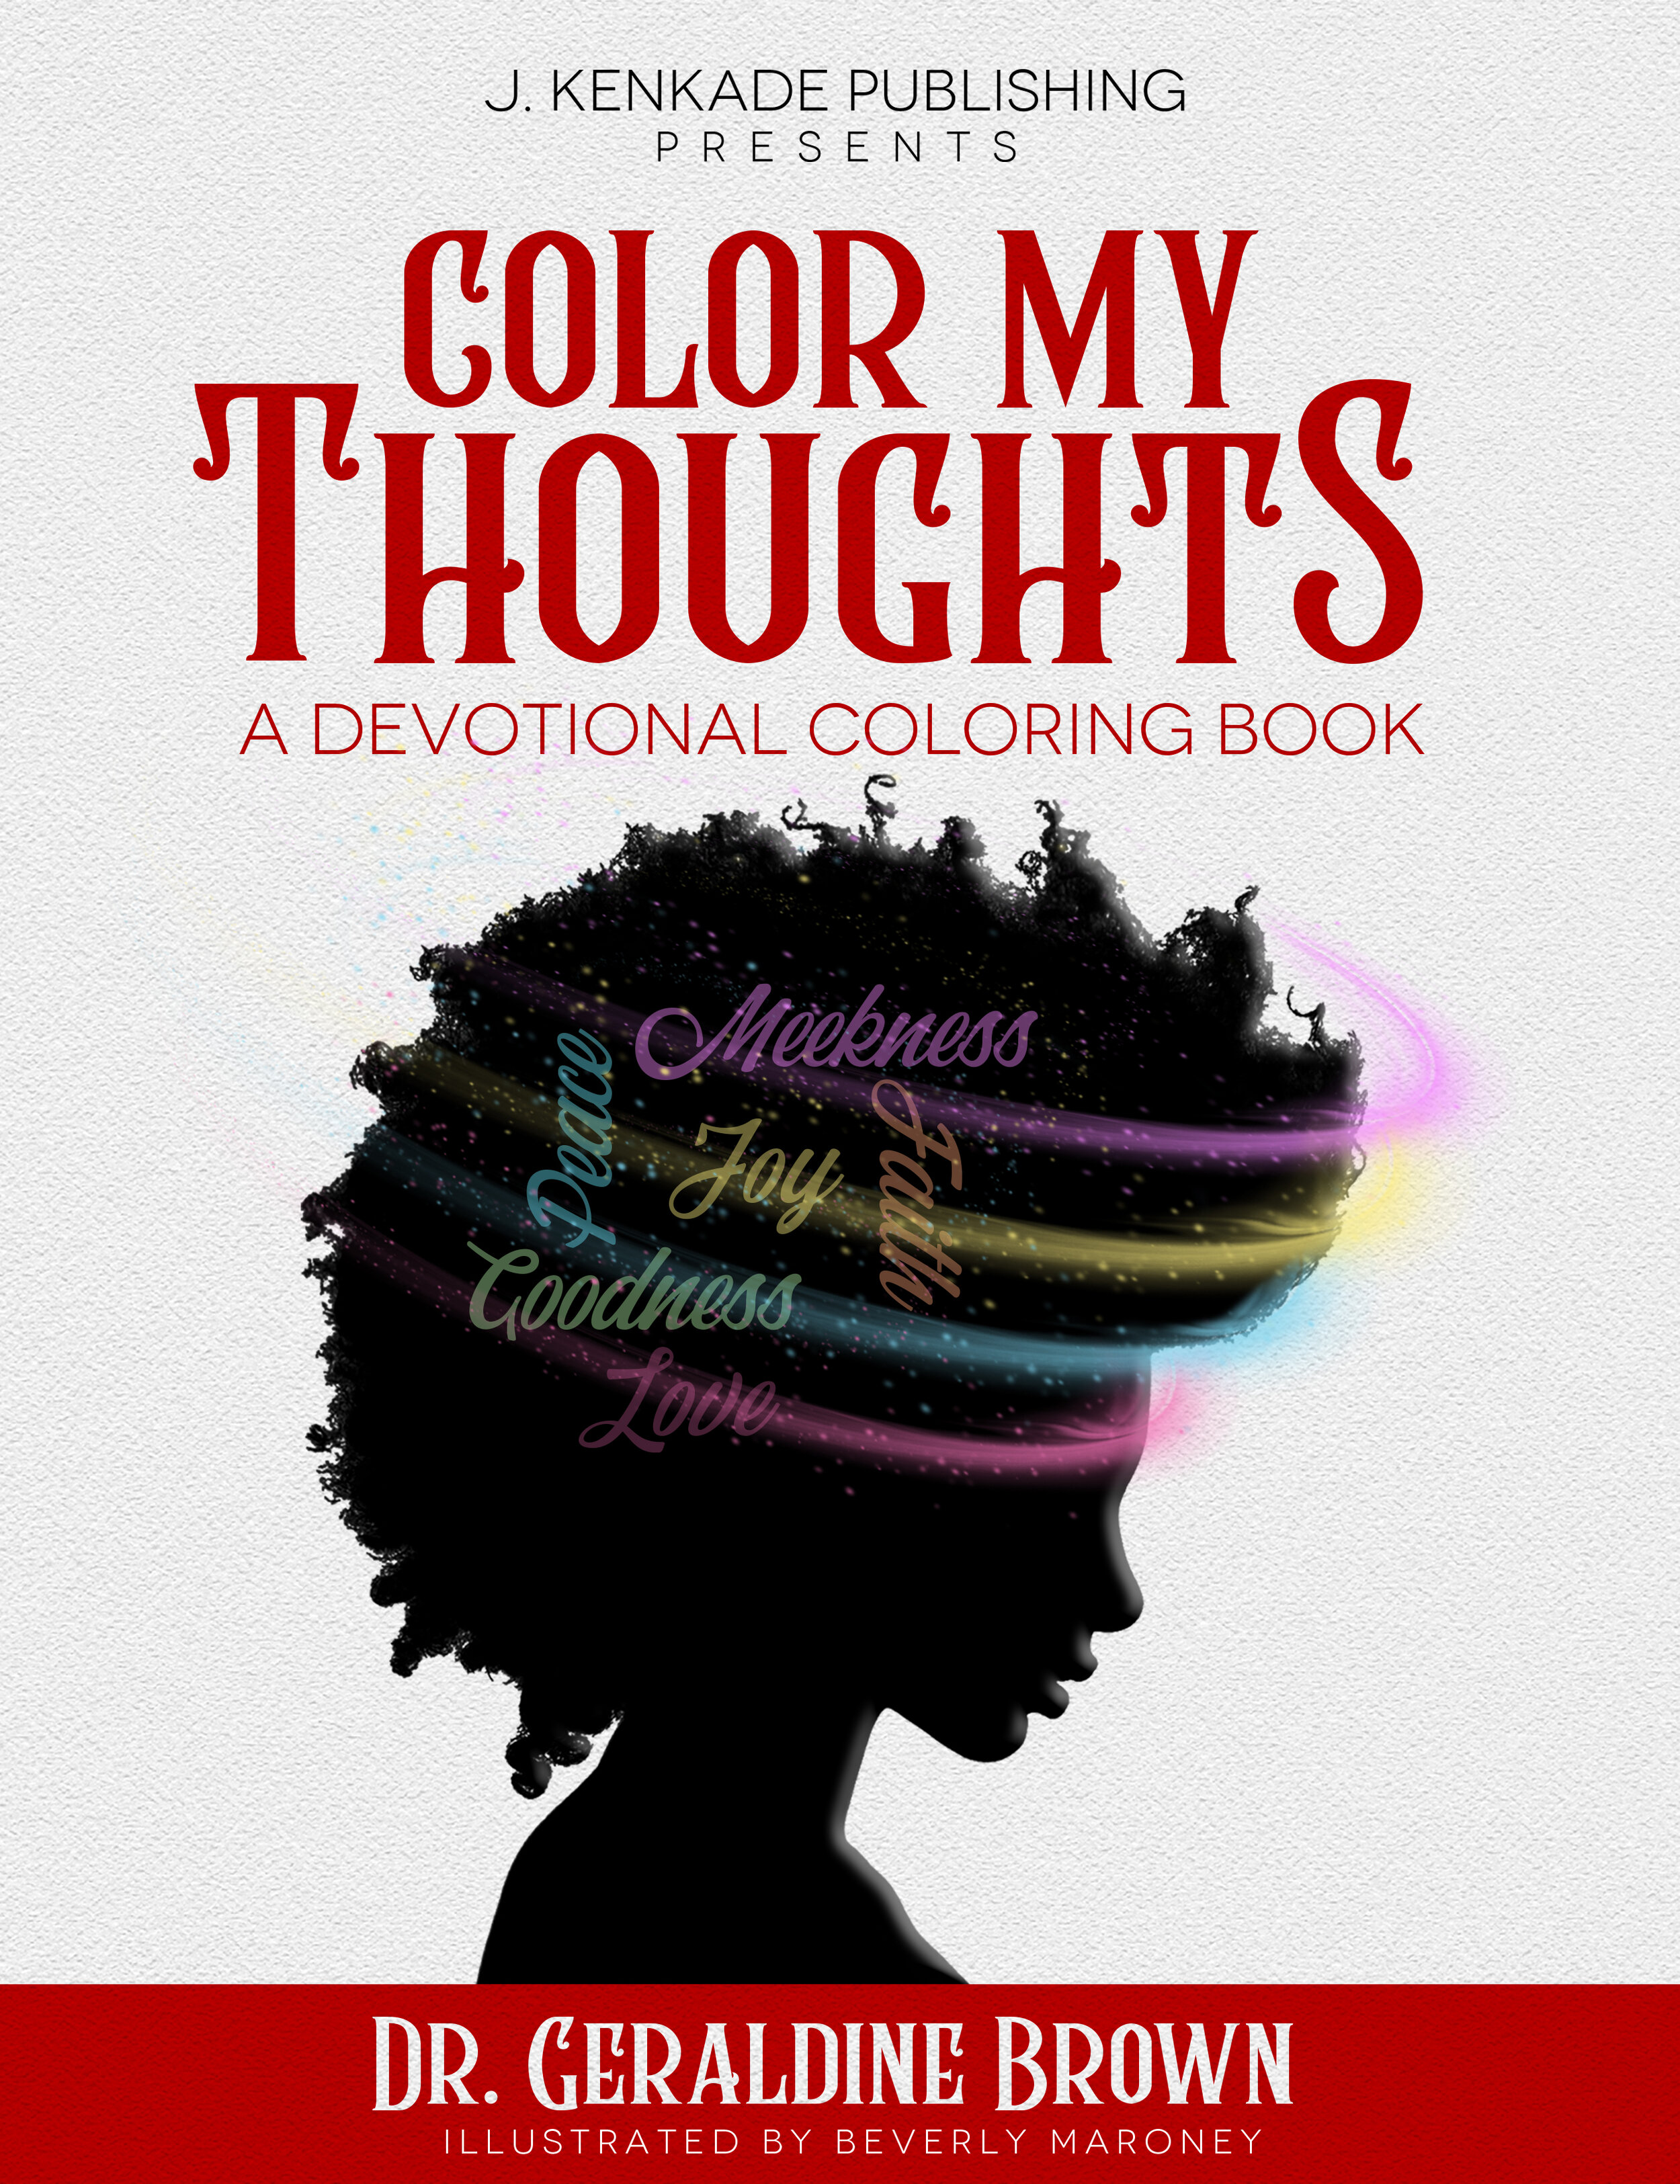 Kindle Book-Color My Thoughts.jpg